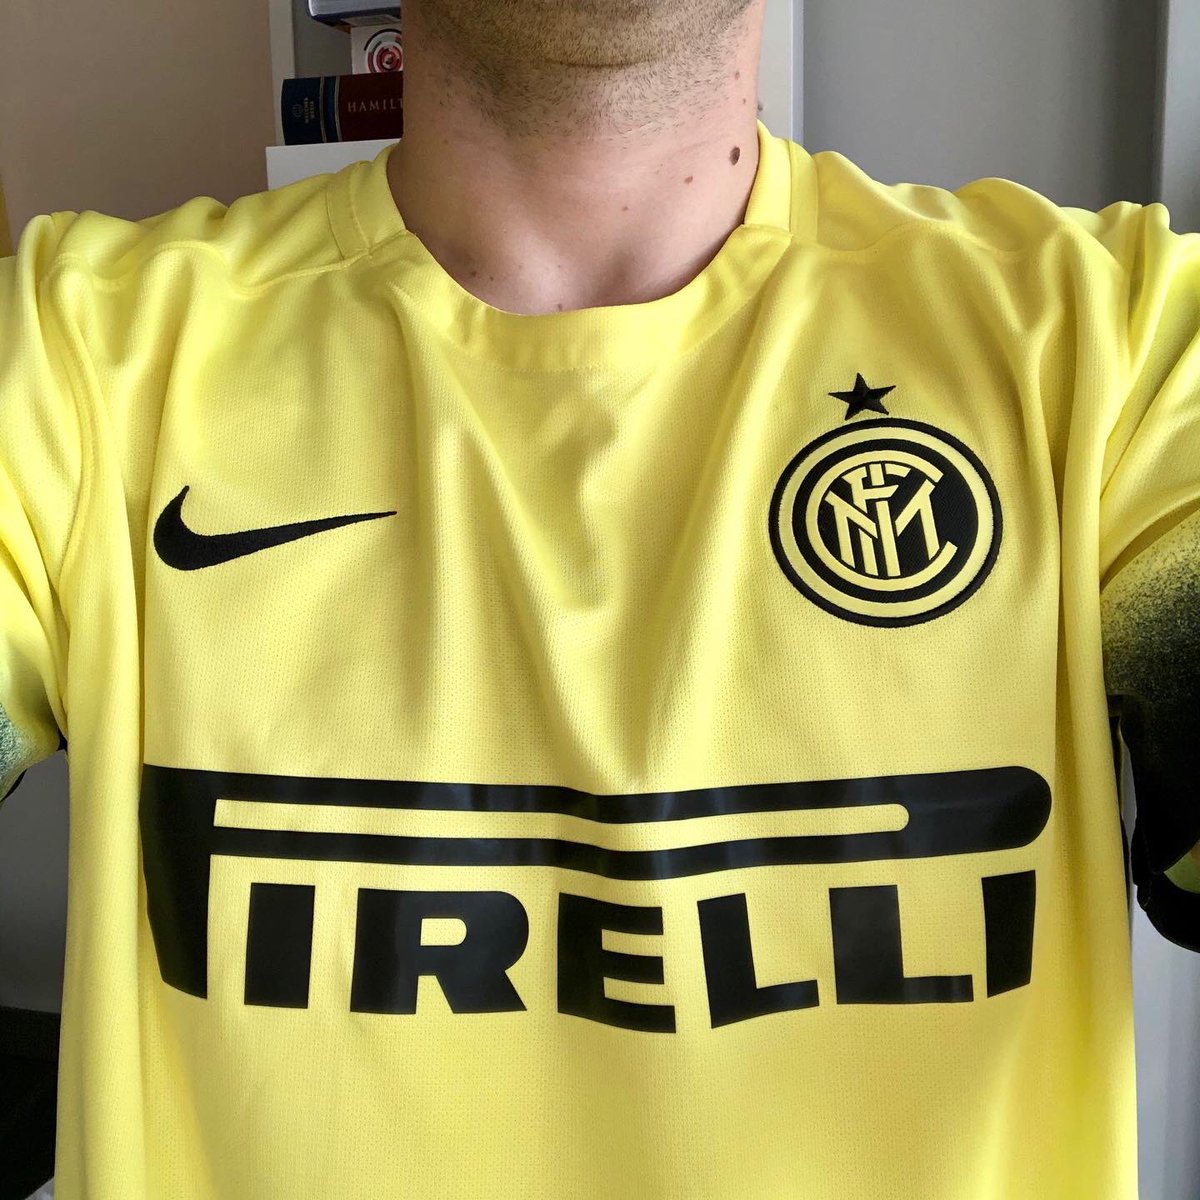 . @InterThird Kit, 2015/16NikeI barely remember Inter wearing this third kit that season, which was all in all rather forgettable. Inter was going through a difficult period, which made this shirt a good fit in a sense #FootballShirtCollection  #HomeShirt